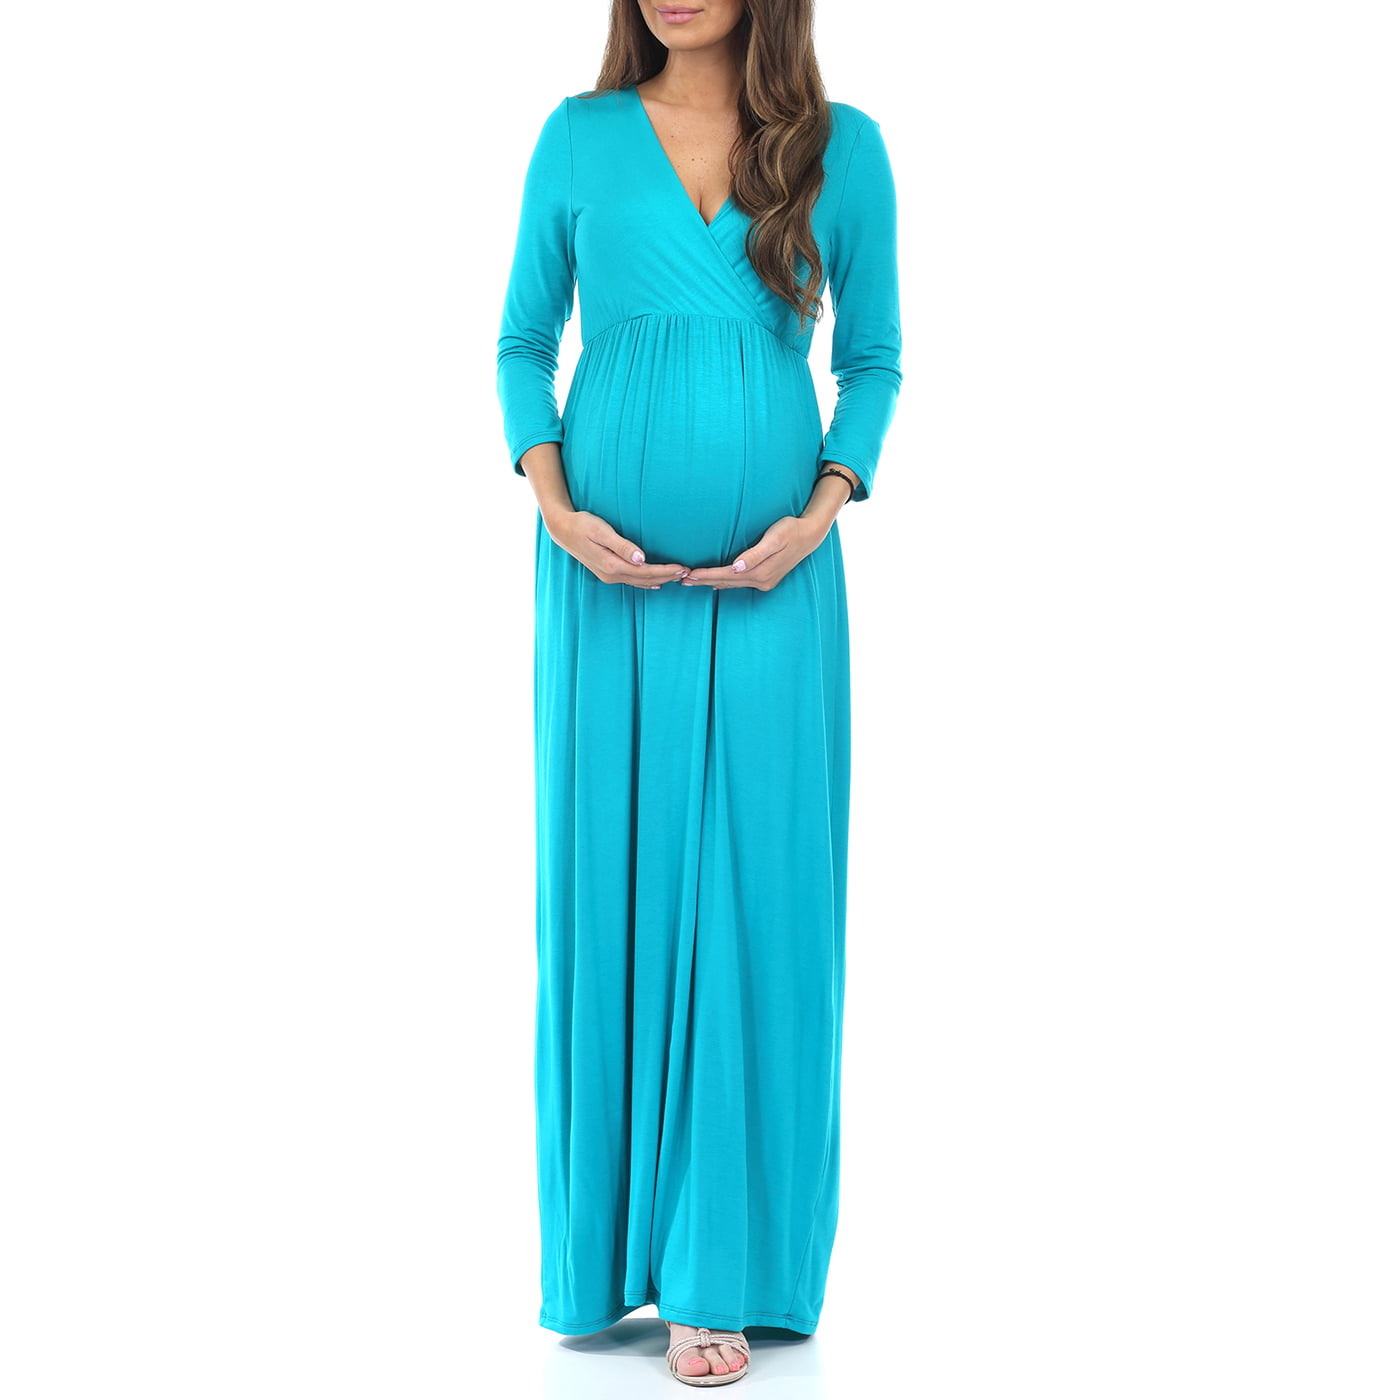 Mother Bee Maternity 3/4 Sleeve Ruched Maternity Dress W/Empire Waist for Baby Showers or Casual Wear 